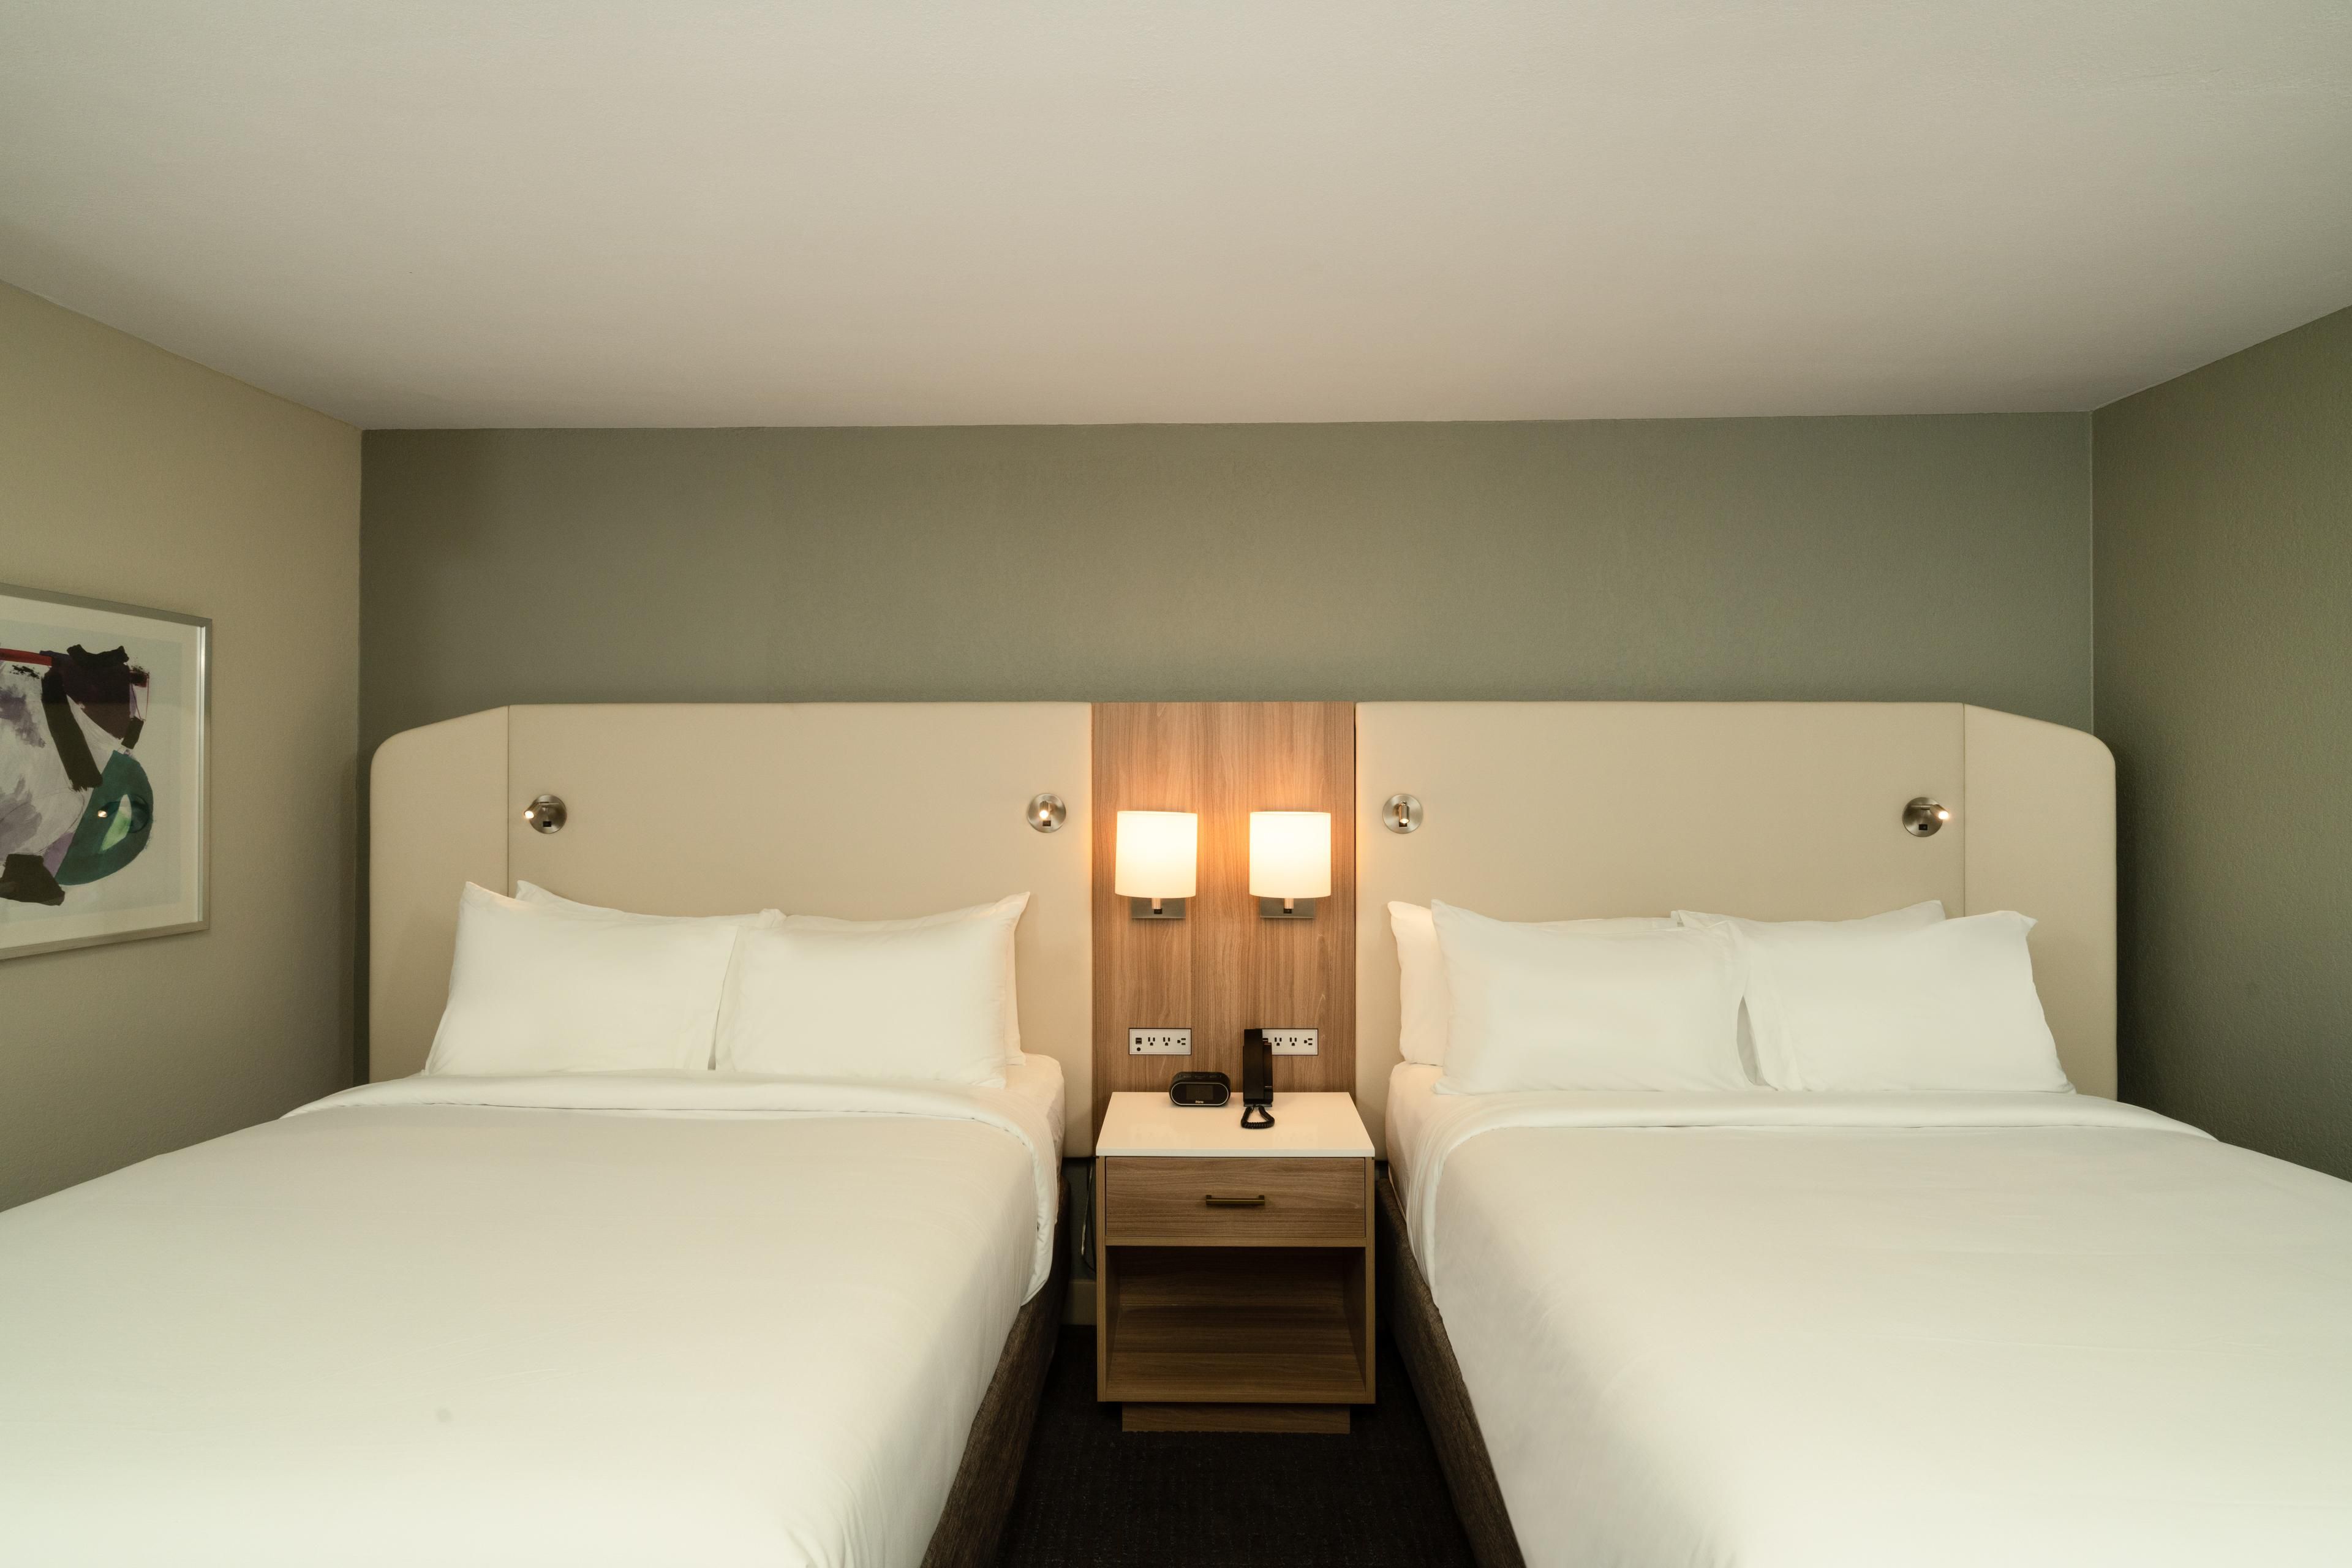 At the end of a long day, relax in our clean, fresh guest rooms!